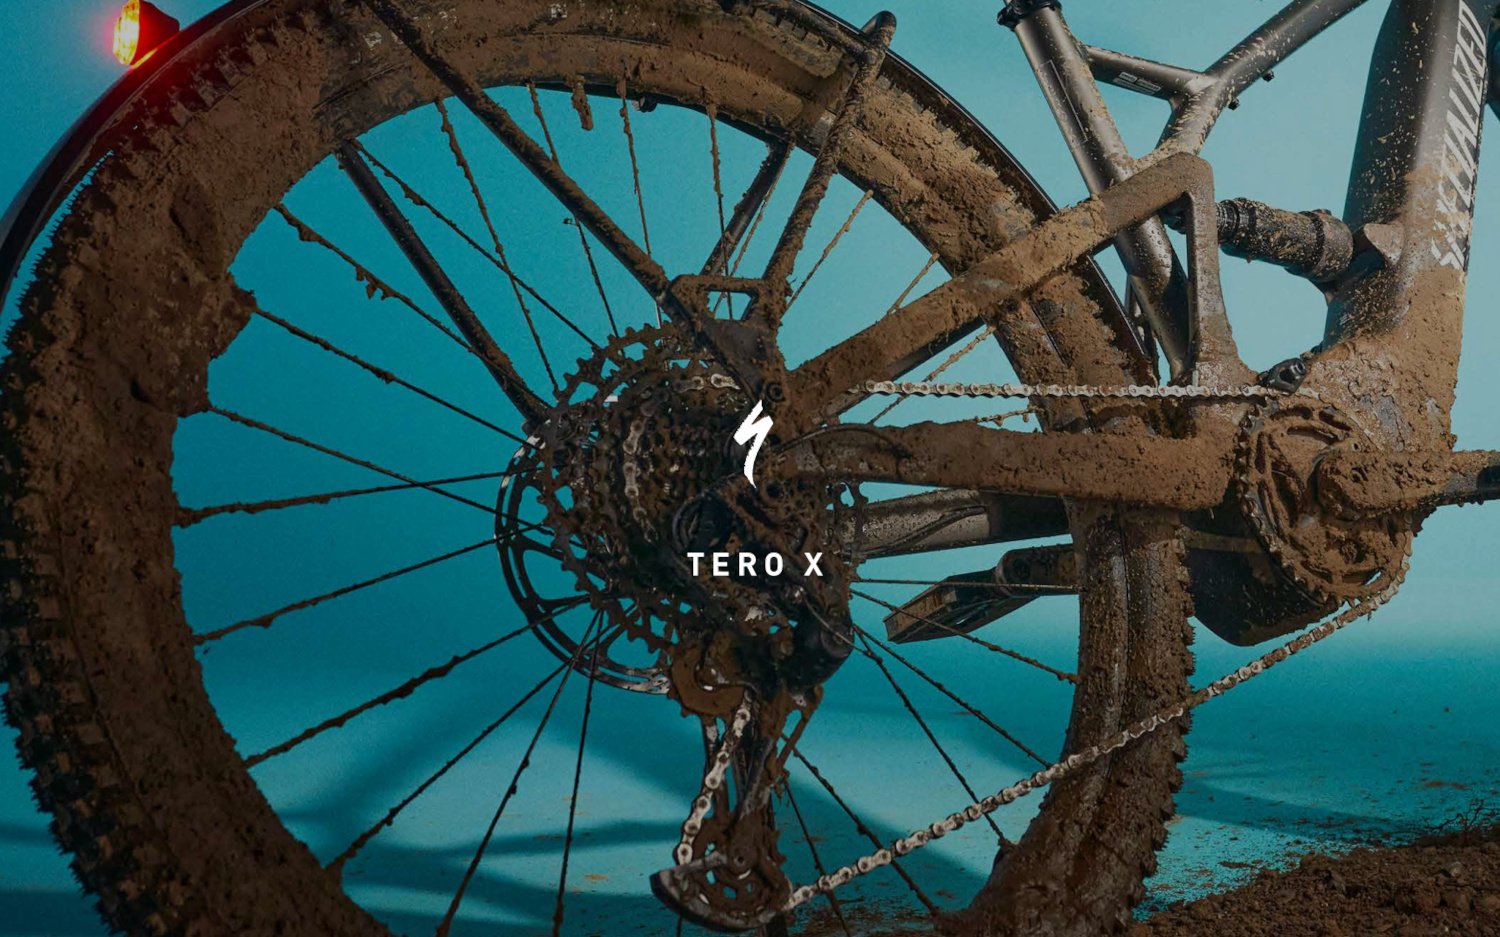 Introducing the new Specialized Turbo Tero X full suspension emtb